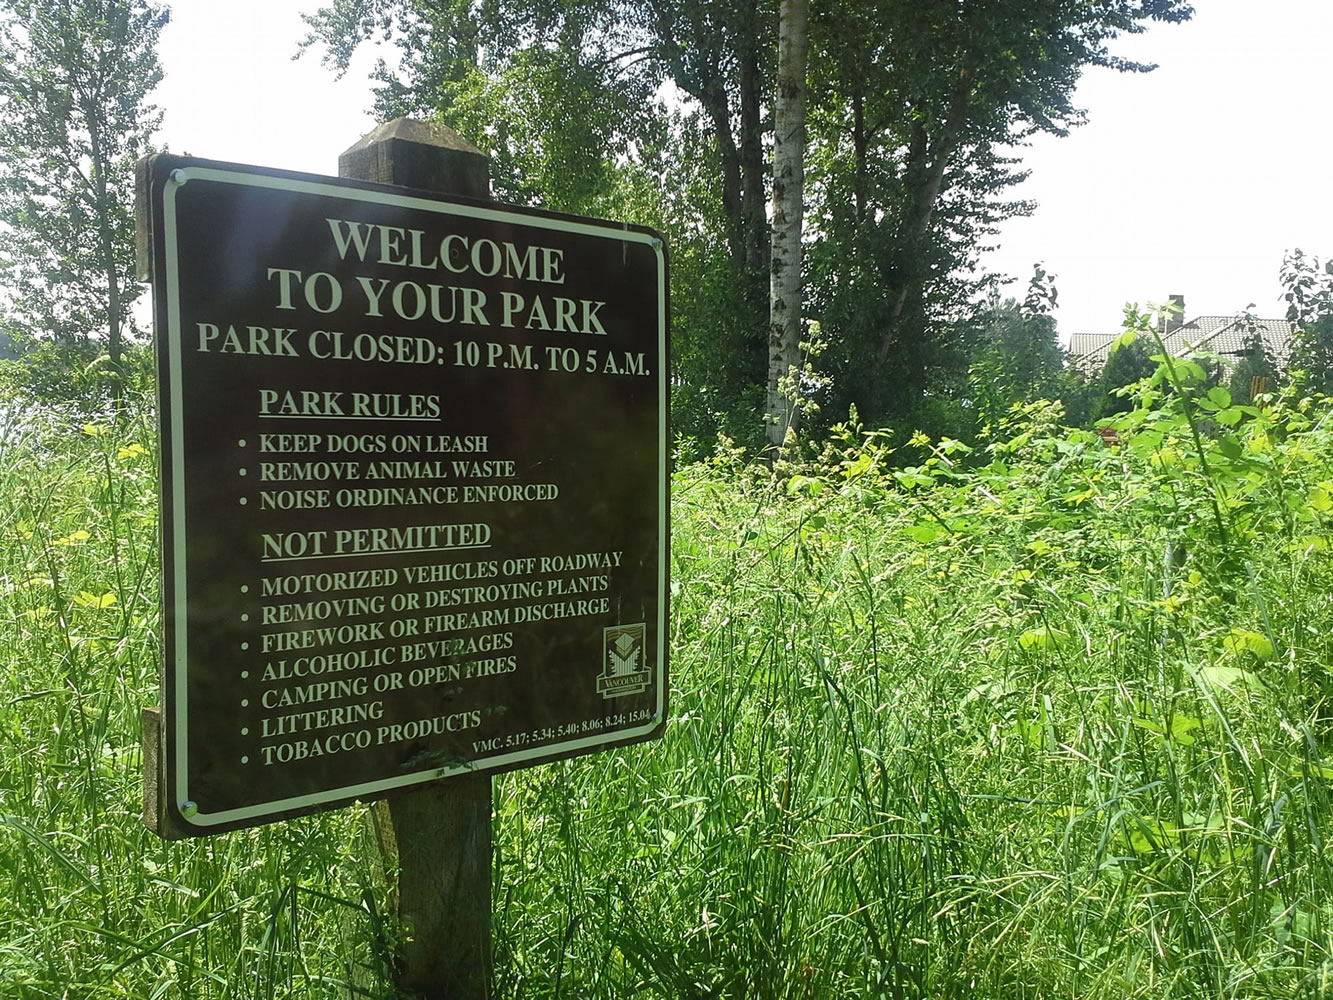 The entrance to an undeveloped park where Southeast 164th Avenue dead ends at the Columbia River.